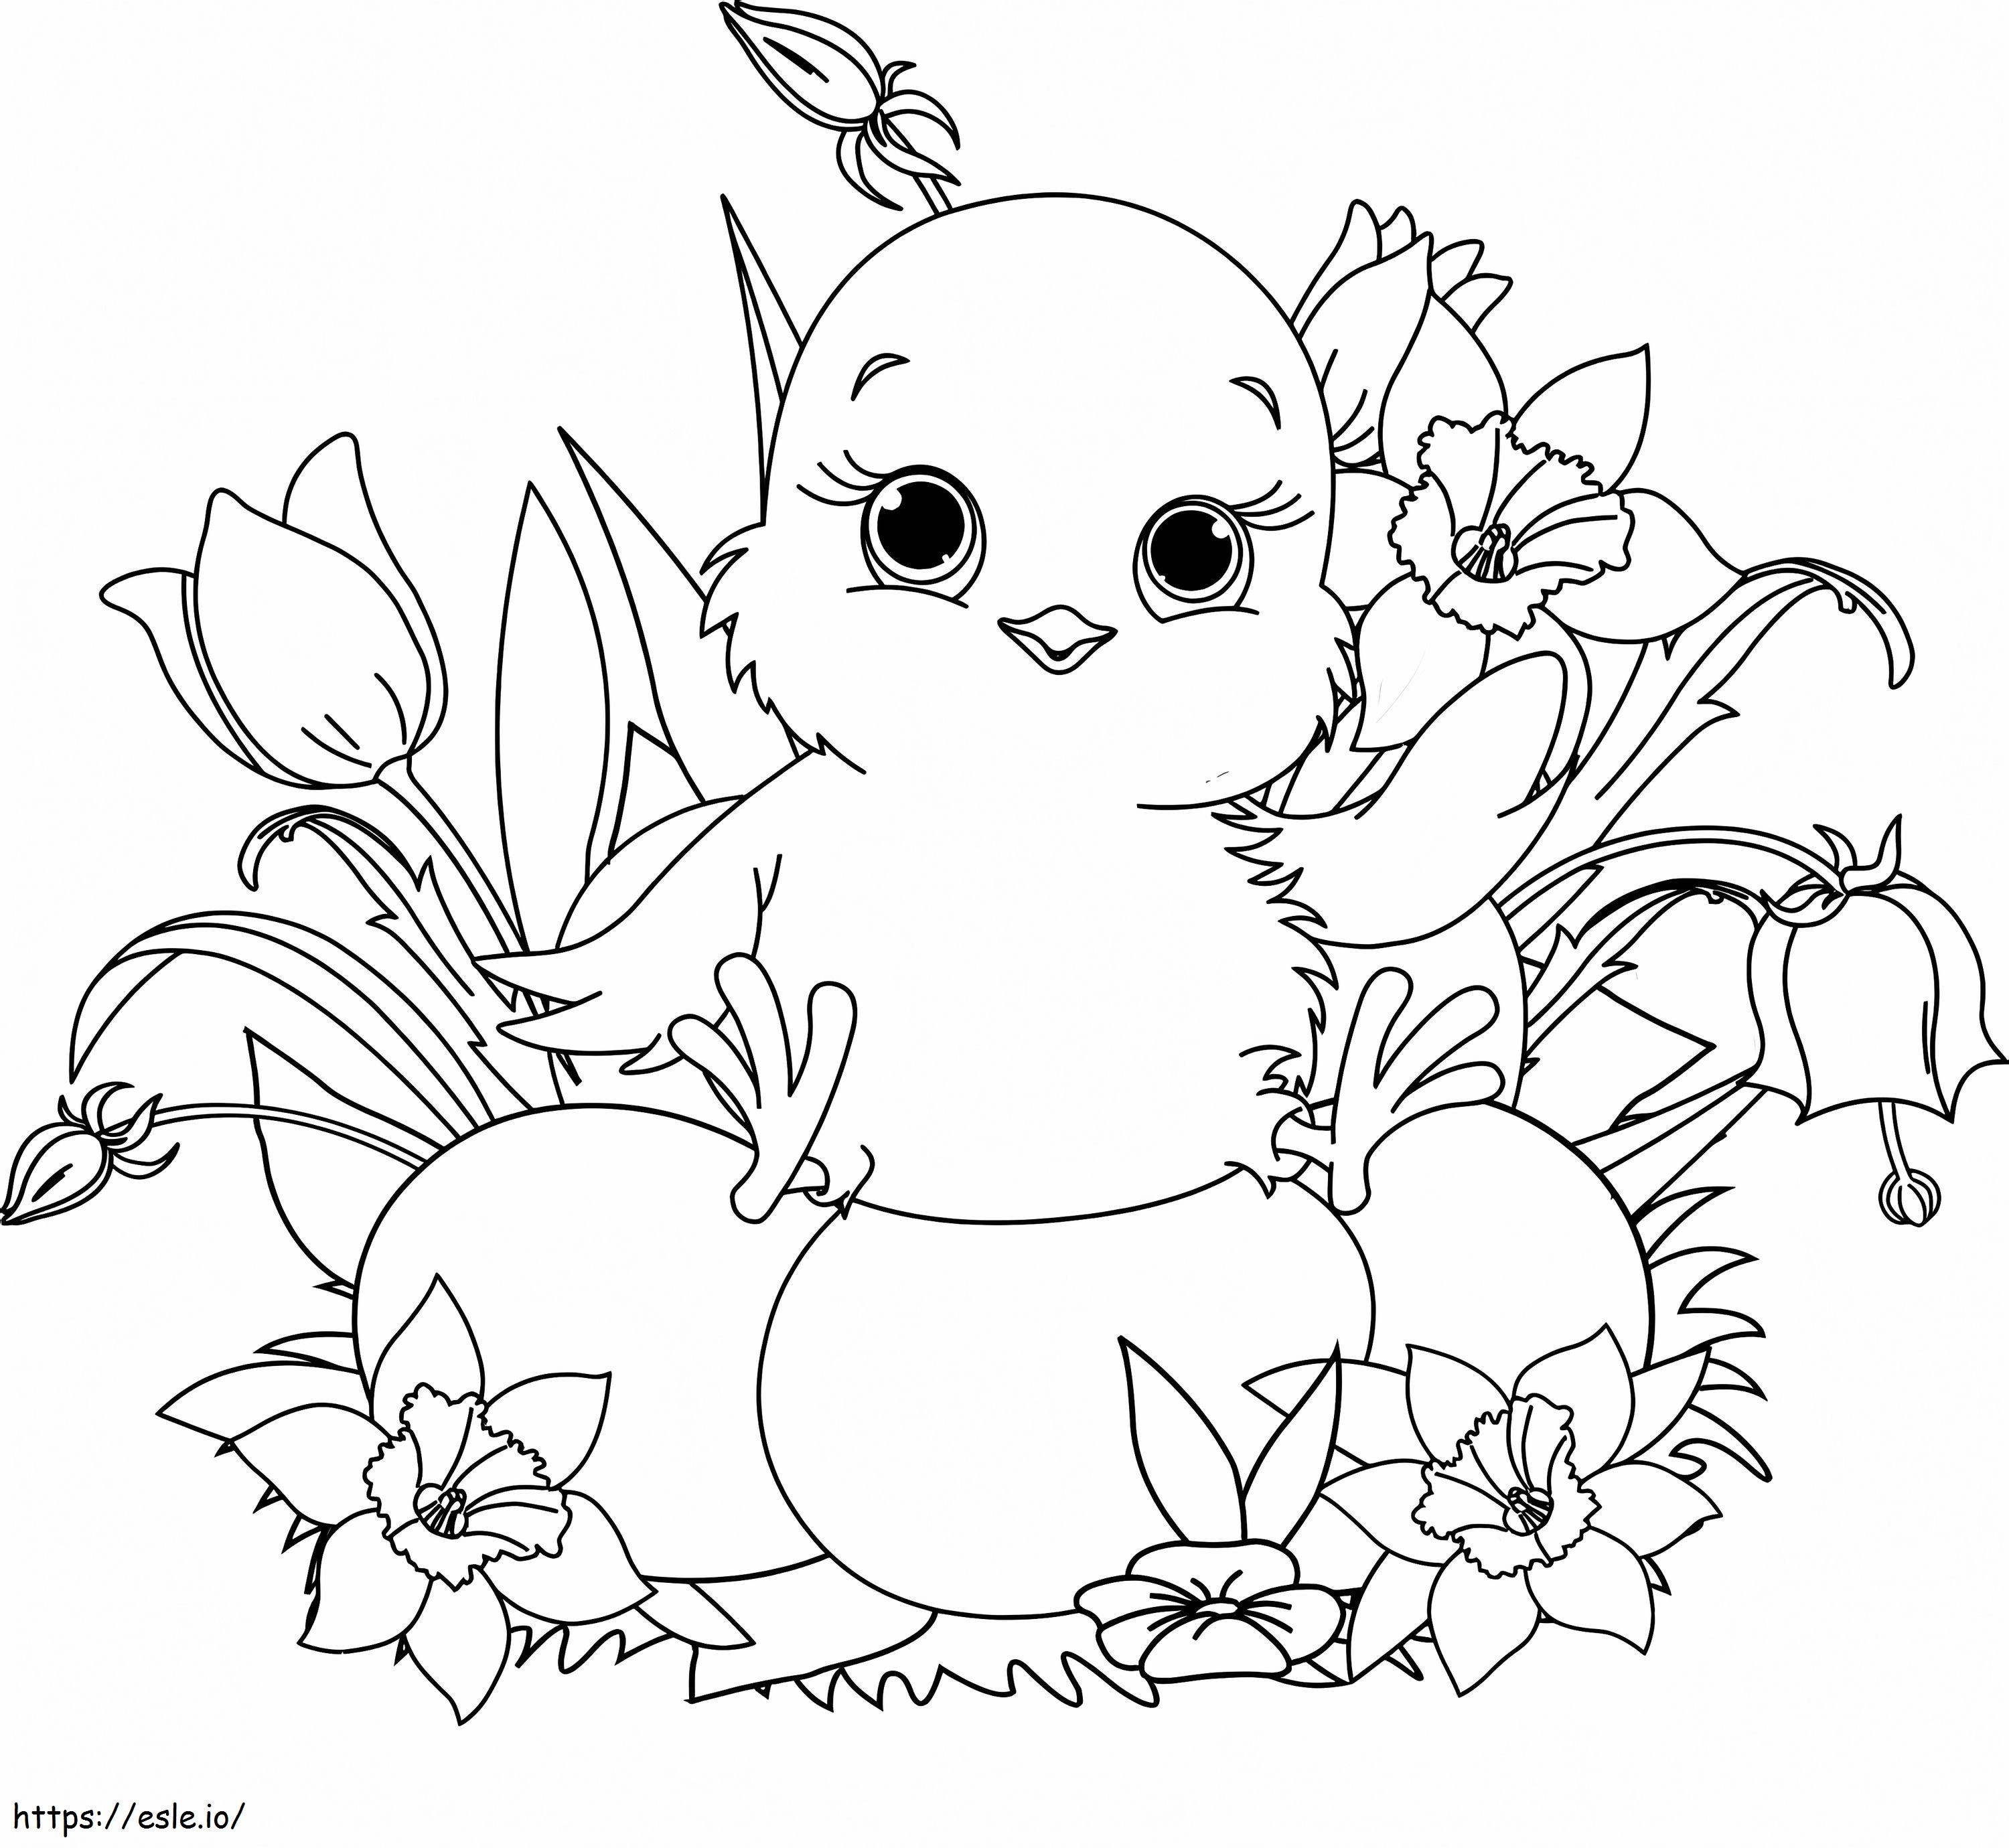 Chick And Flower coloring page